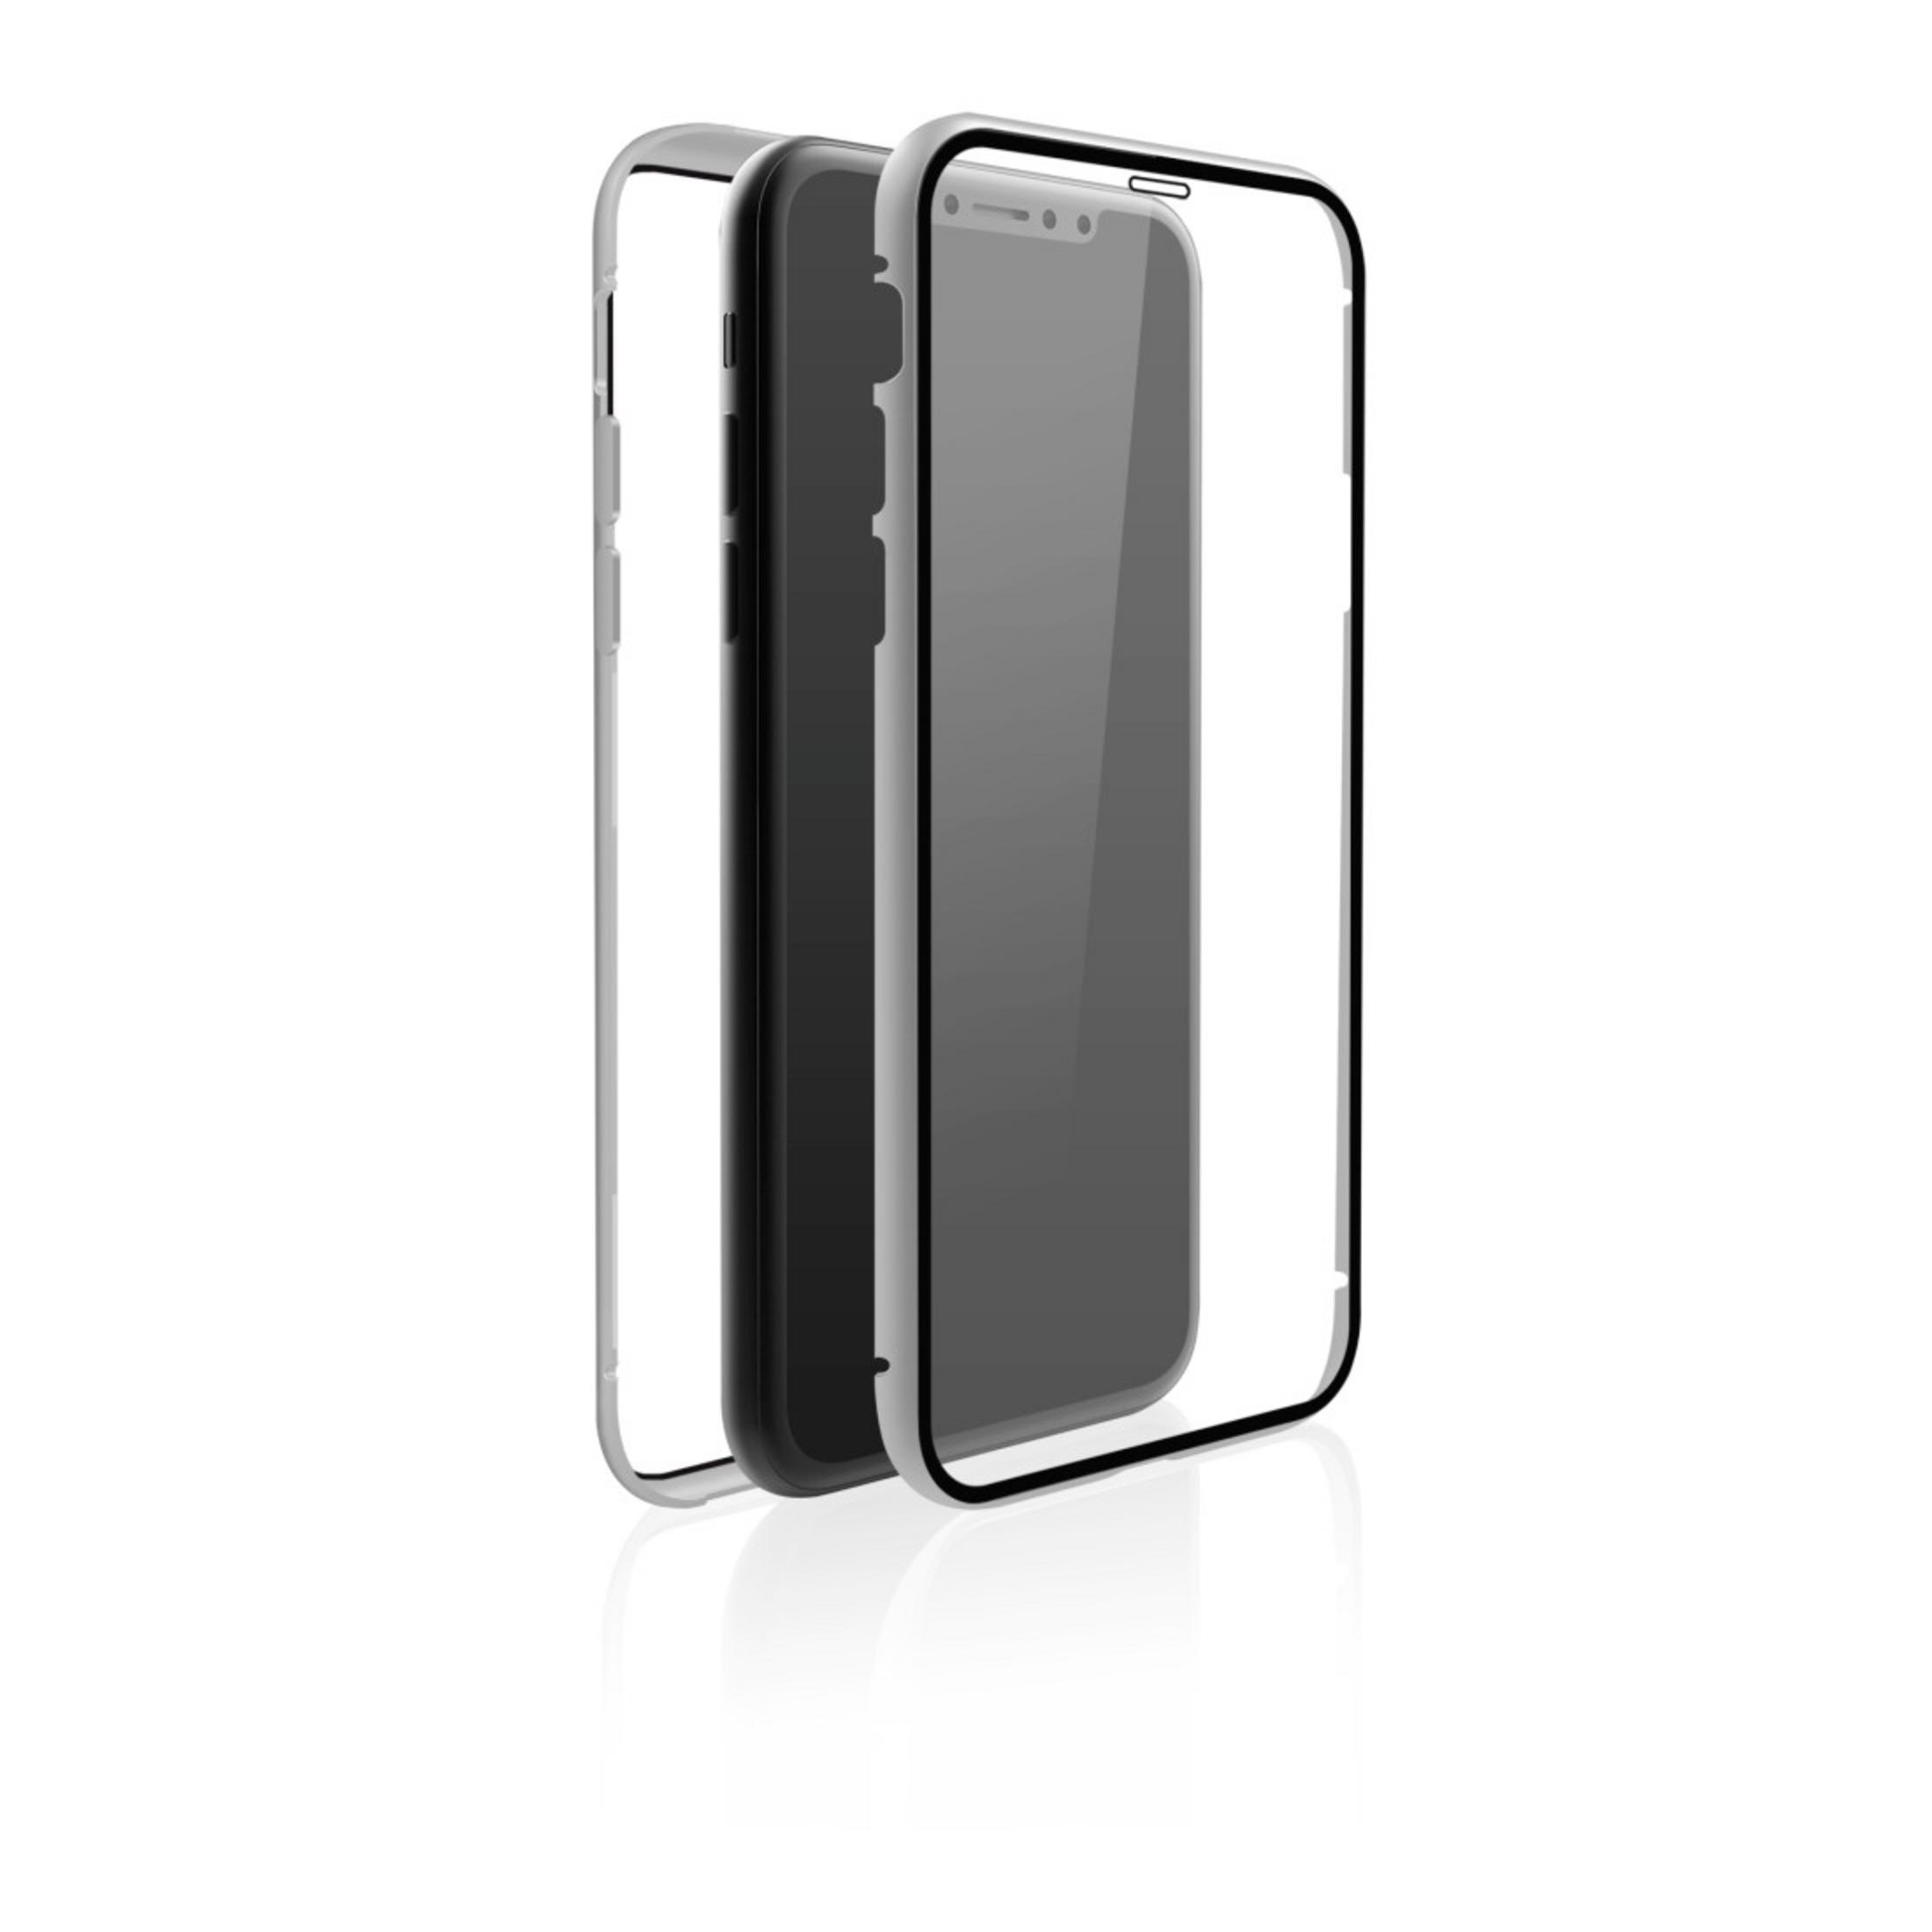 Apple, Pro, Full Cover, PRO, 186985 11 11 iPhone 360° BLACK GLASS ROCK IPHONE CO Silber